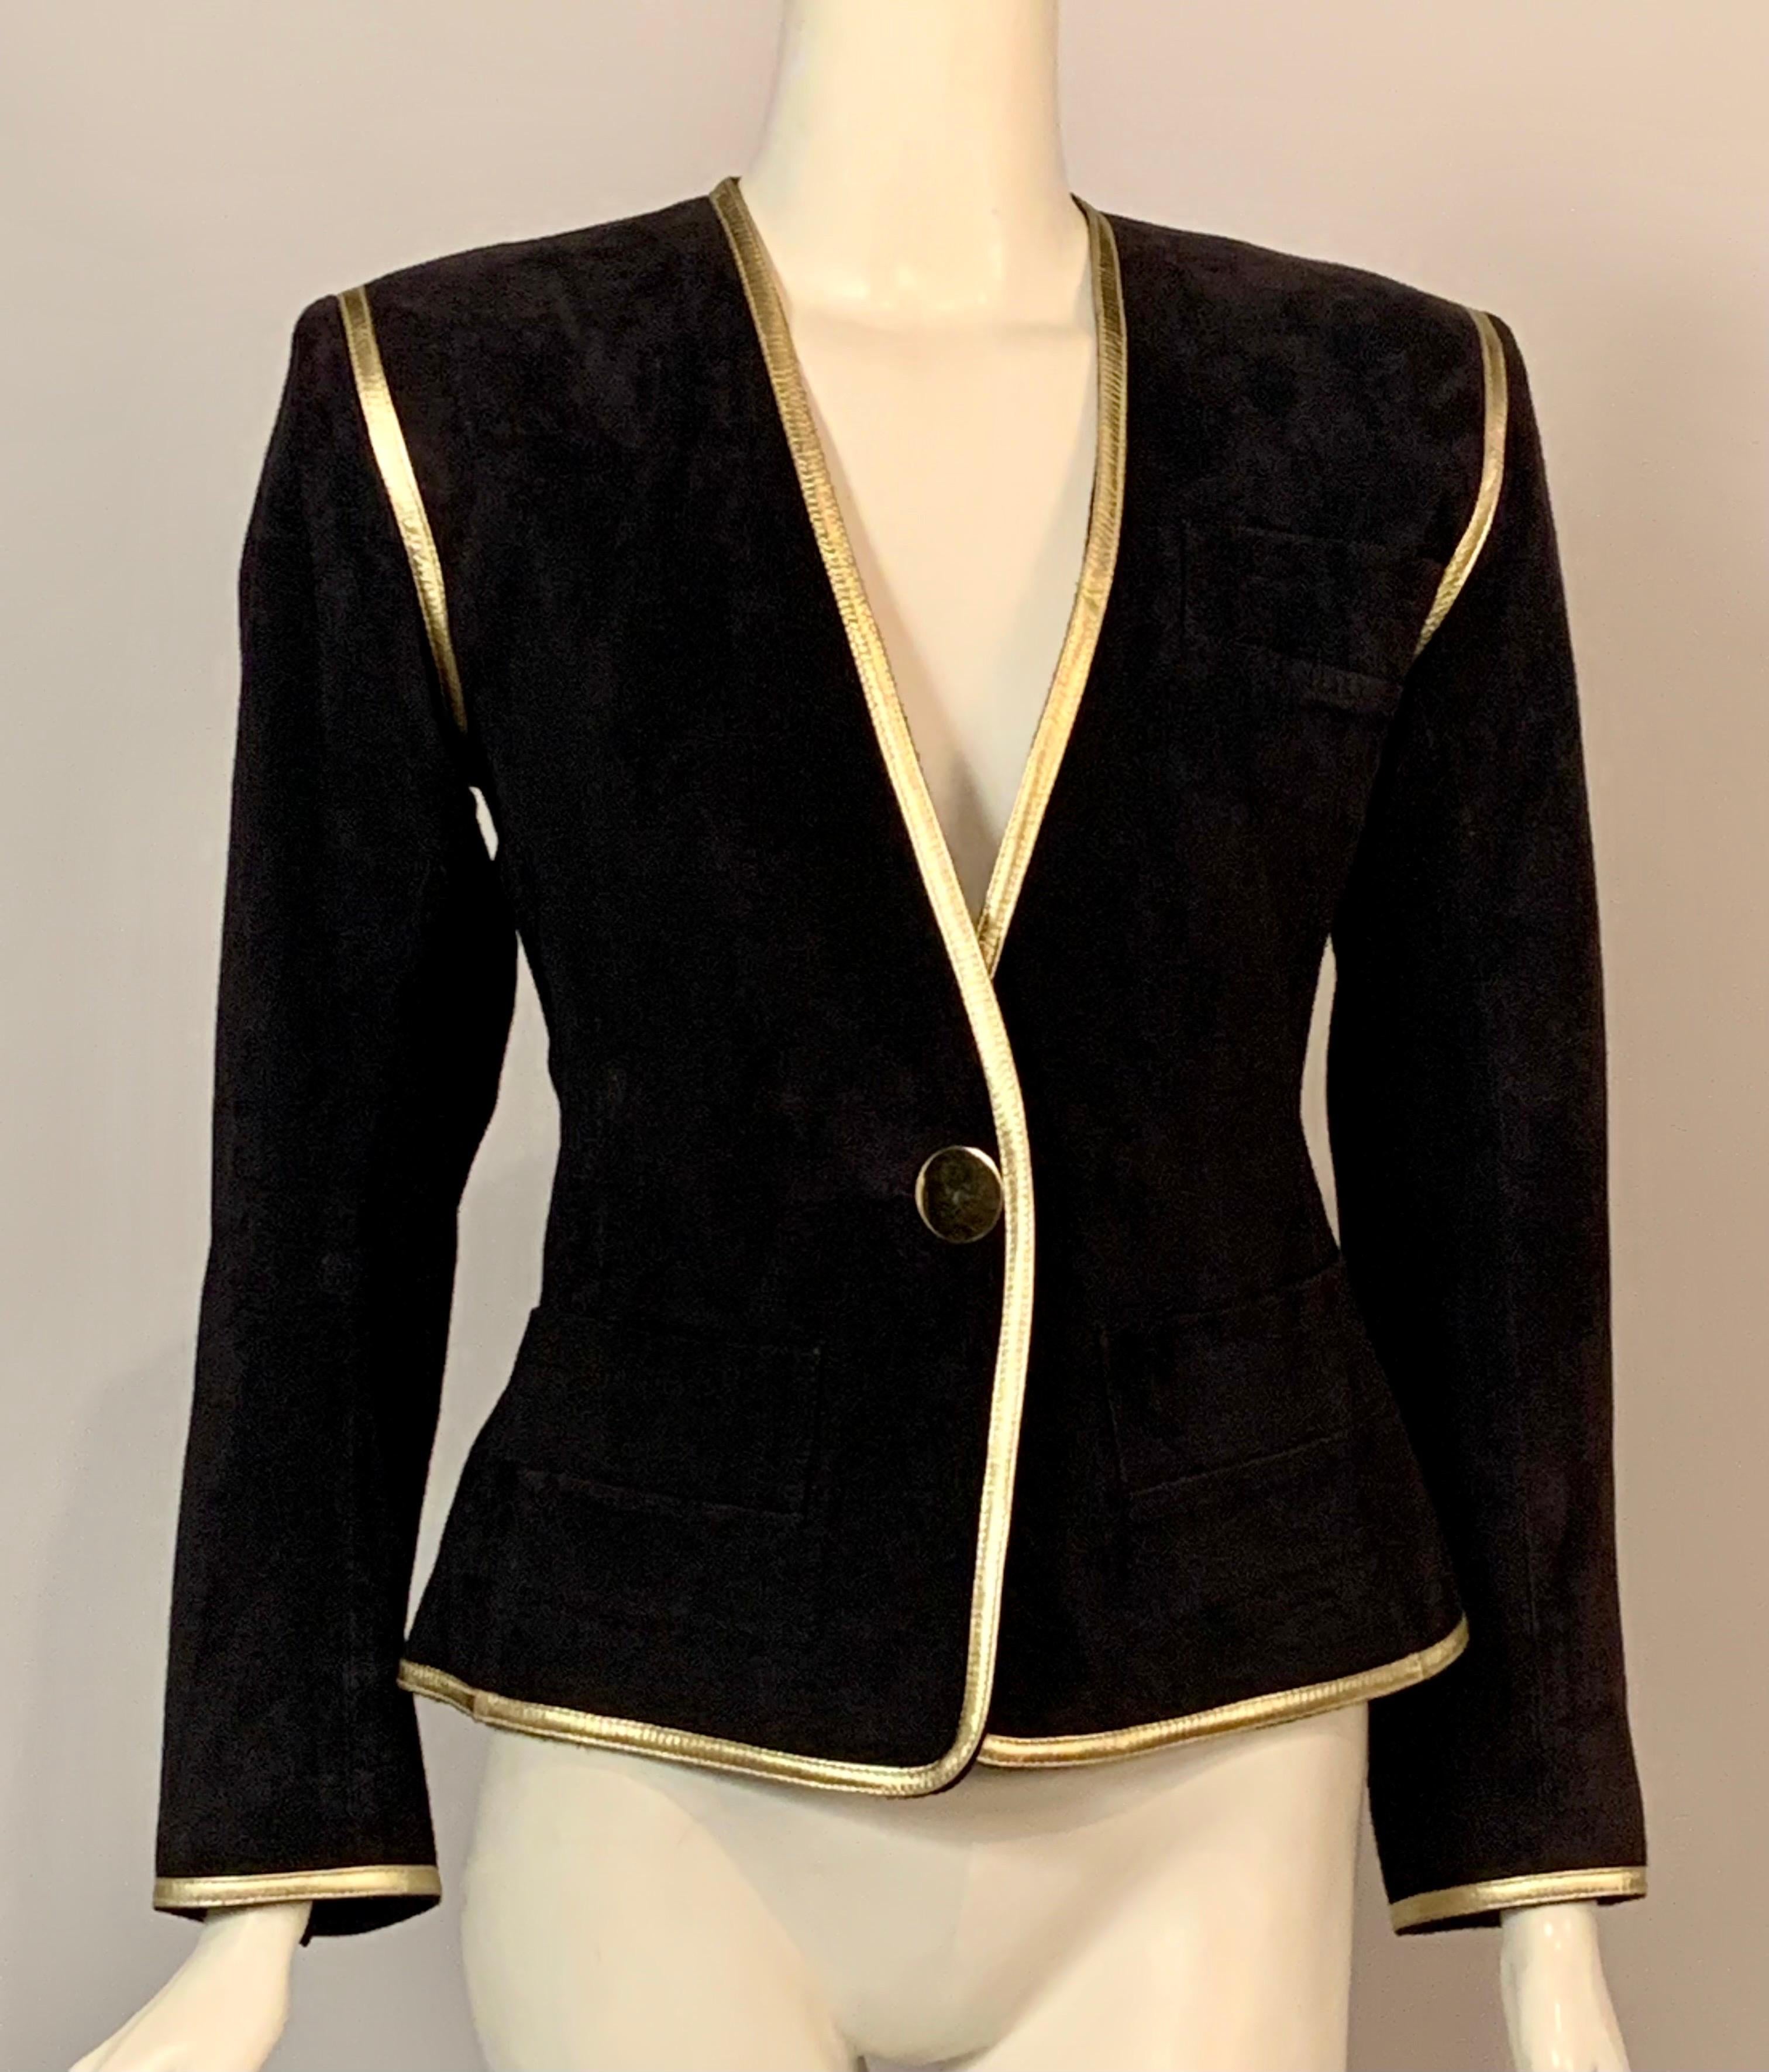 Yves Saint Laurent Black Suede Jacket with Gold Leather Trim In Excellent Condition For Sale In New Hope, PA